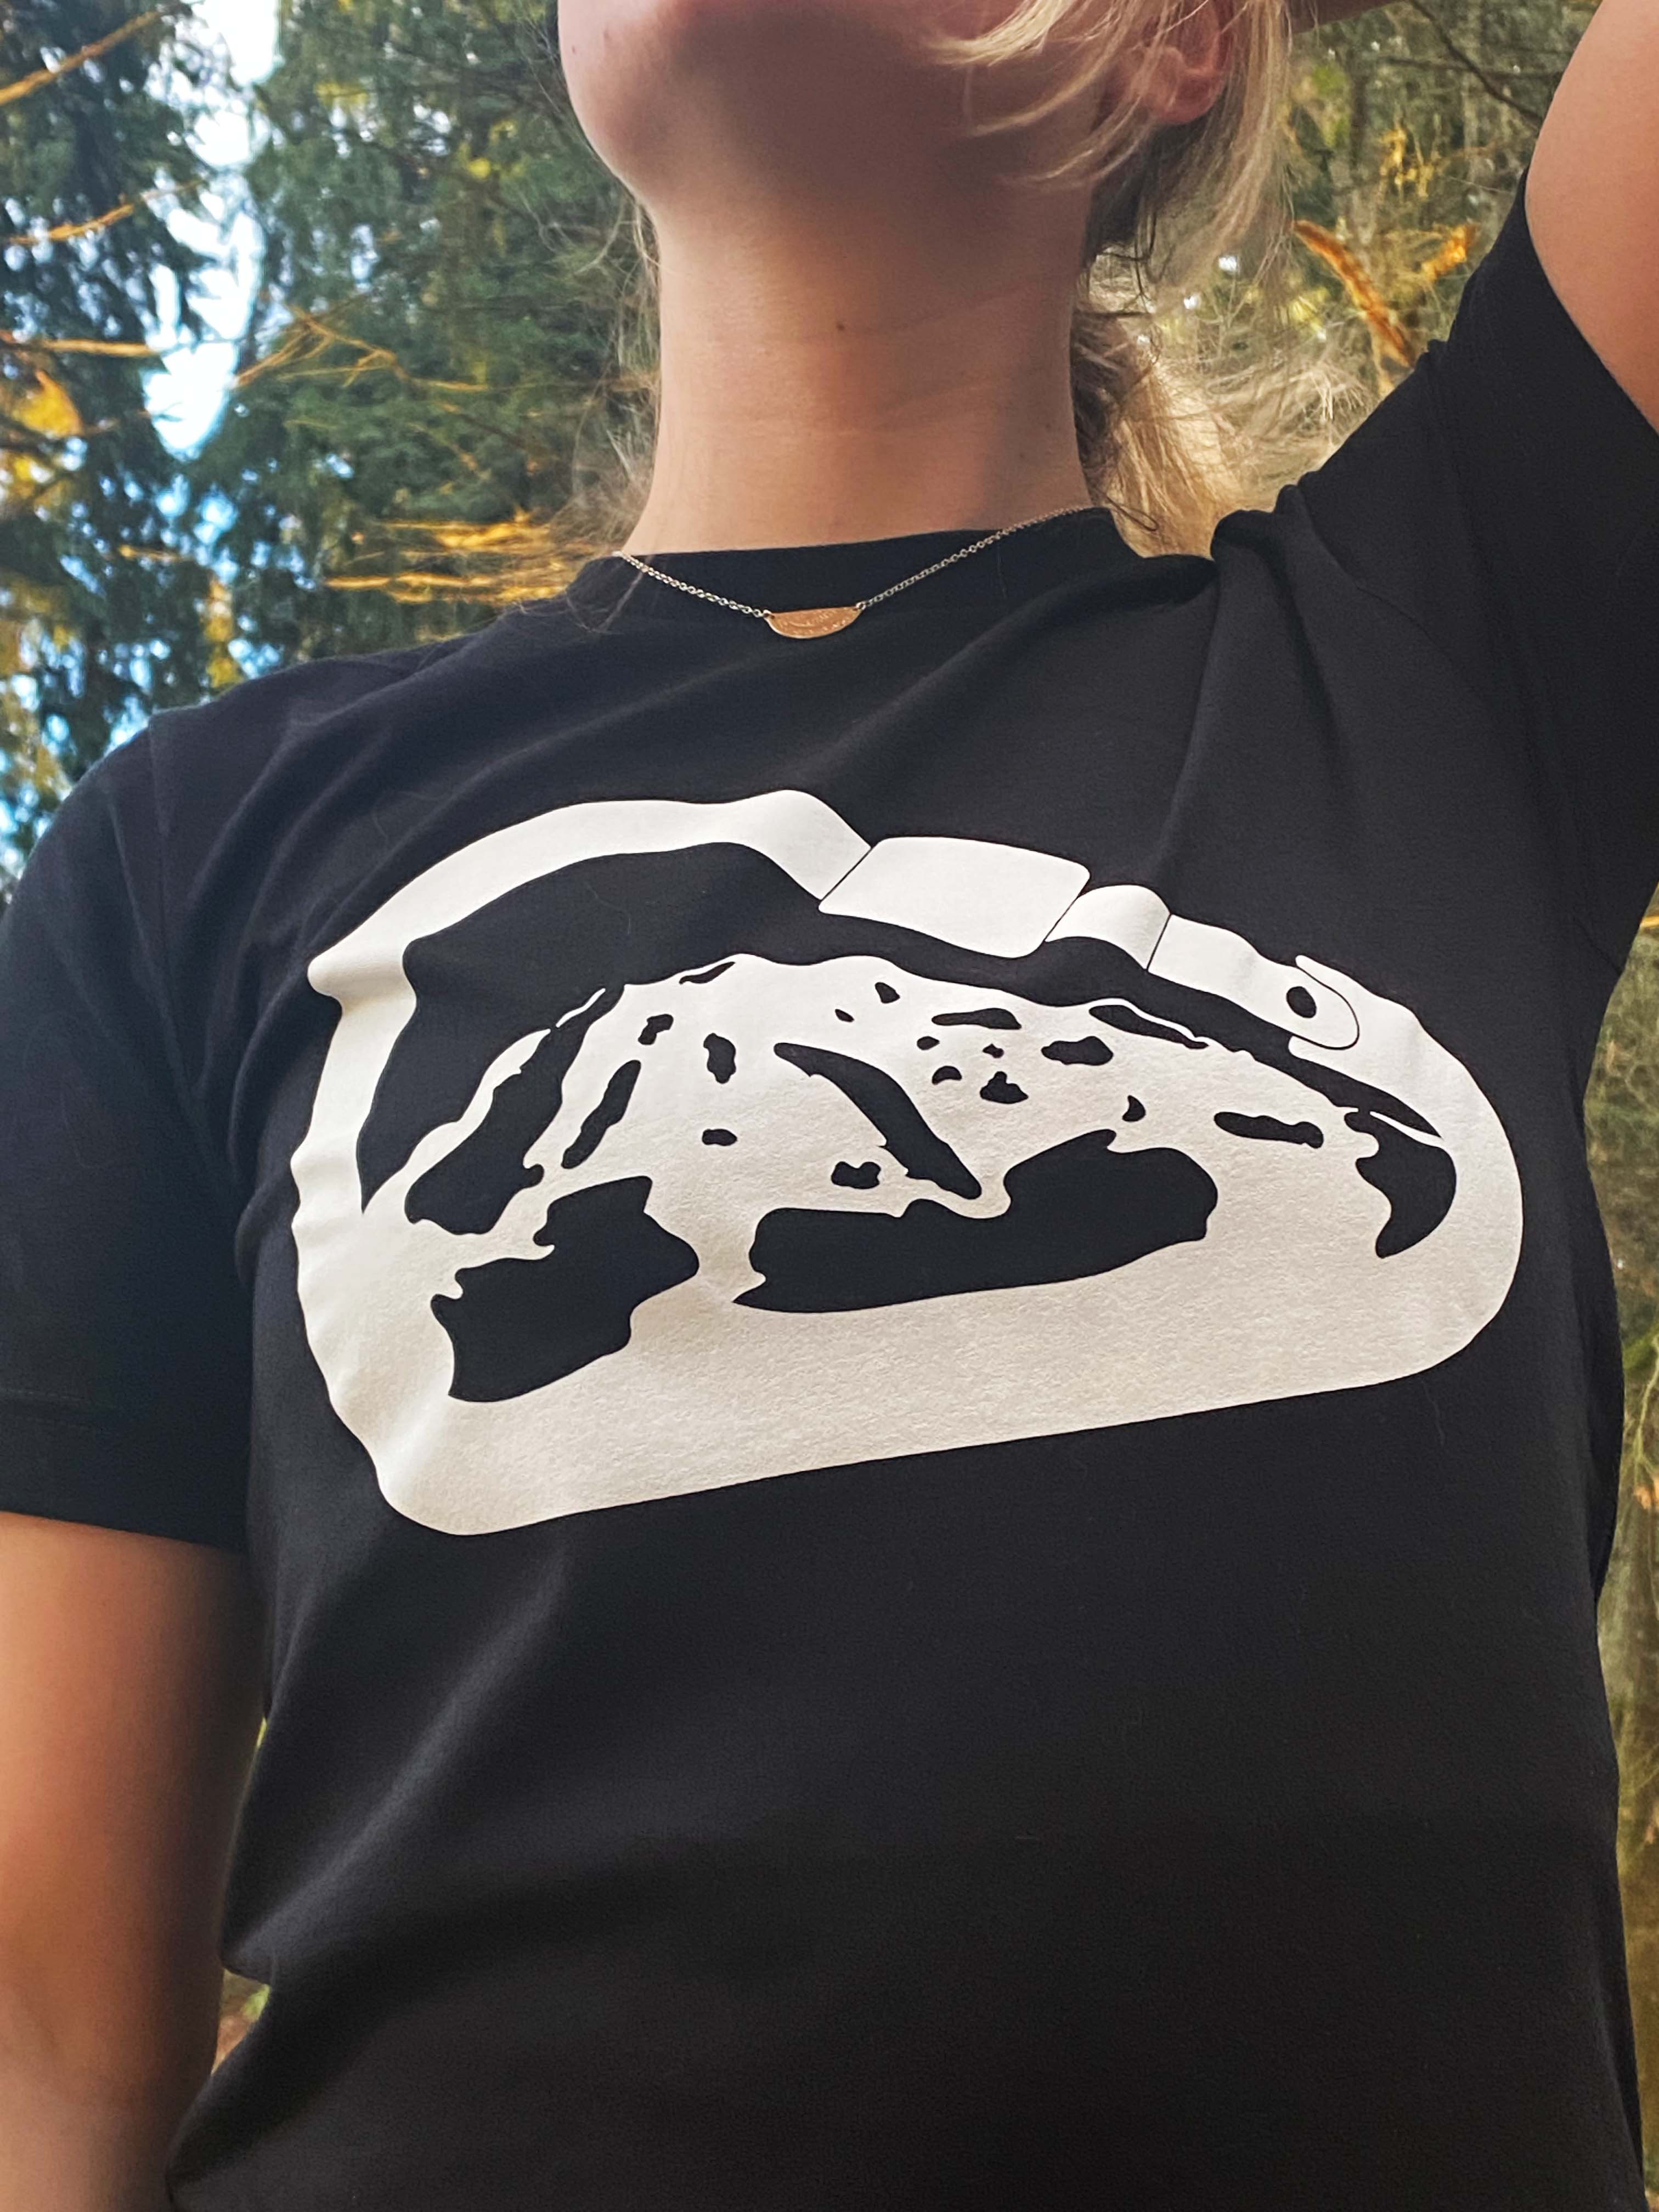 The Rock Junkies | Hooked On the Mountain T-Shirt, T-Shirts, The Rock Junkies, Defiance Outdoor Gear Co.